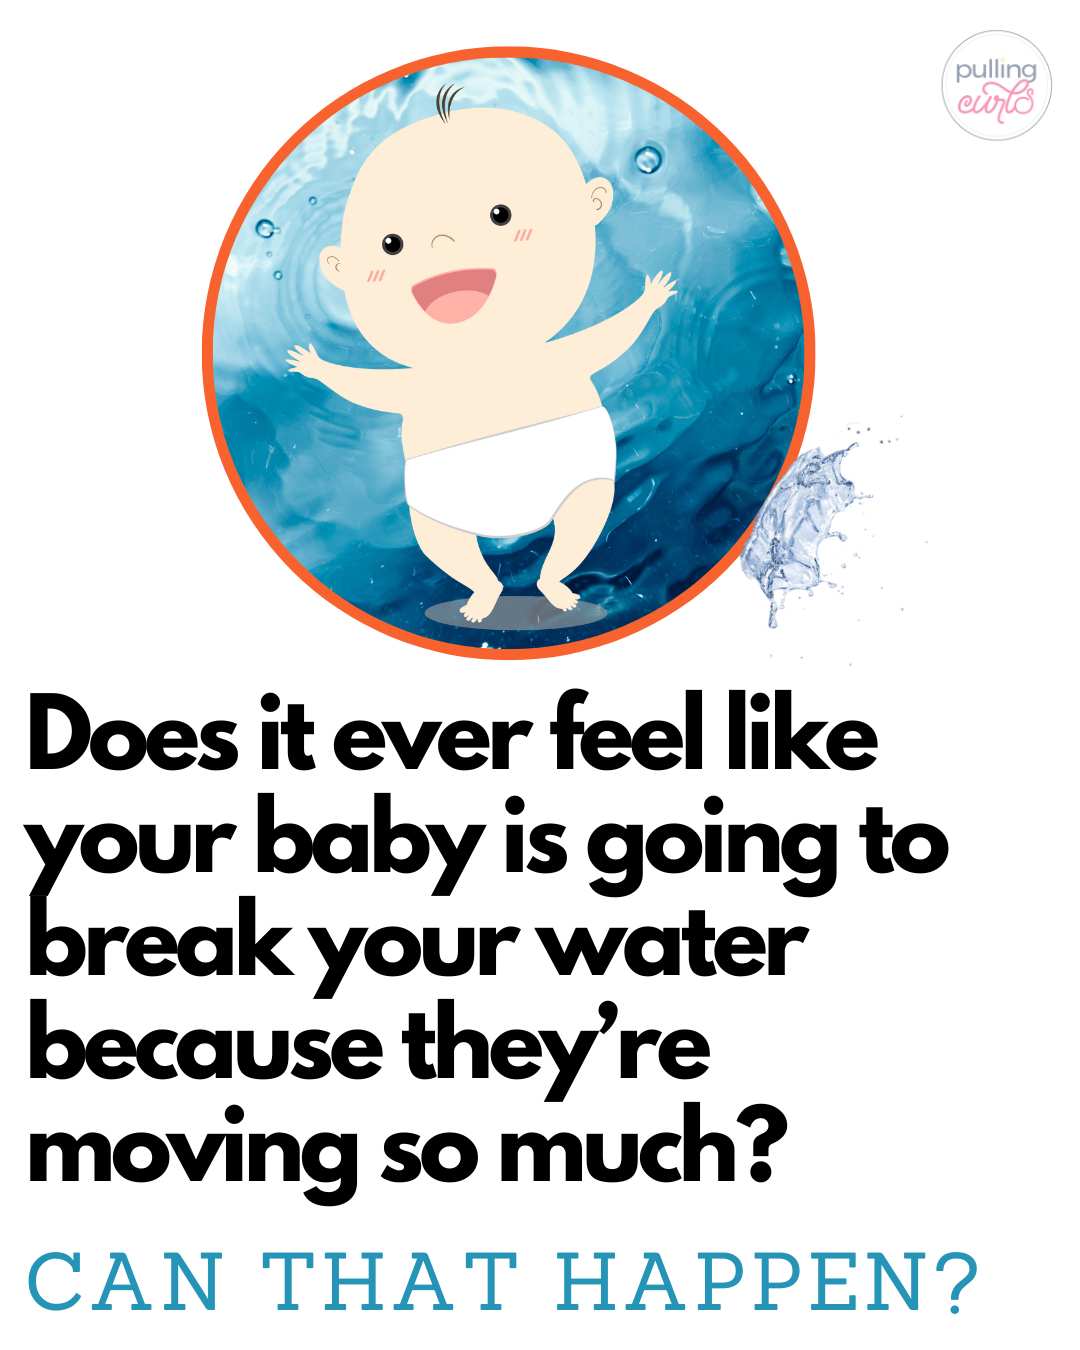 Feeling those tiny 👶 kicks? Worried you might spring a leak 🌊 any minute? You're not alone, mama! Welcome to the trimester where every flutter makes you think 💭 "Is this it? Is my water about to break💧?" Relax, we're in this together! 😊💕 via @pullingcurls